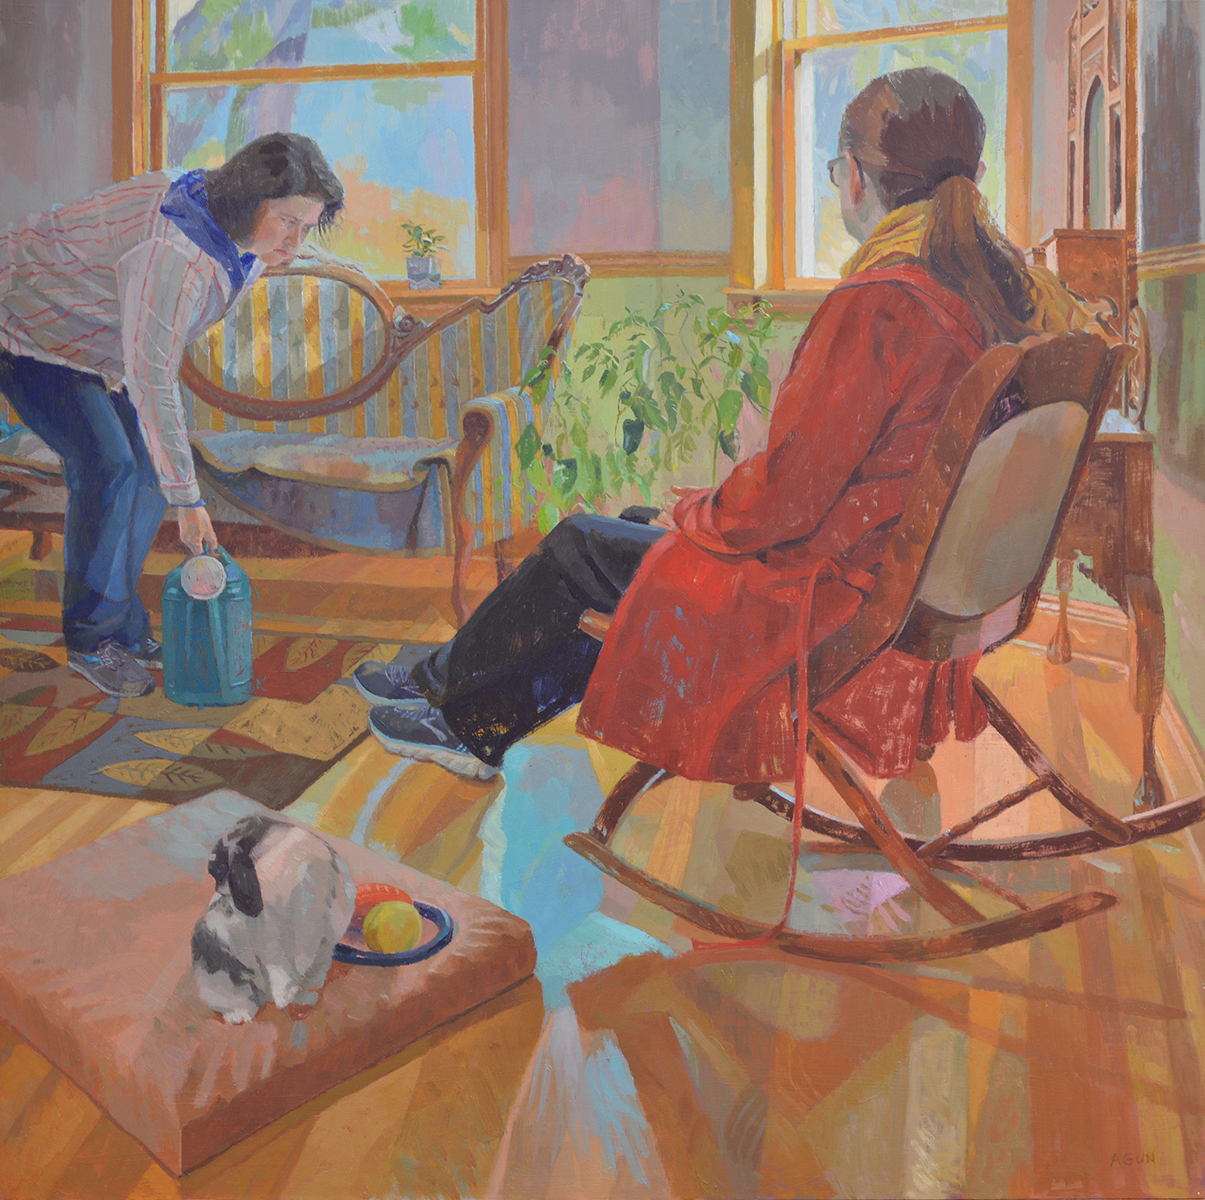 Oil painting of one woman sitting on a rocking chair and another bending down to pick up a watering can.